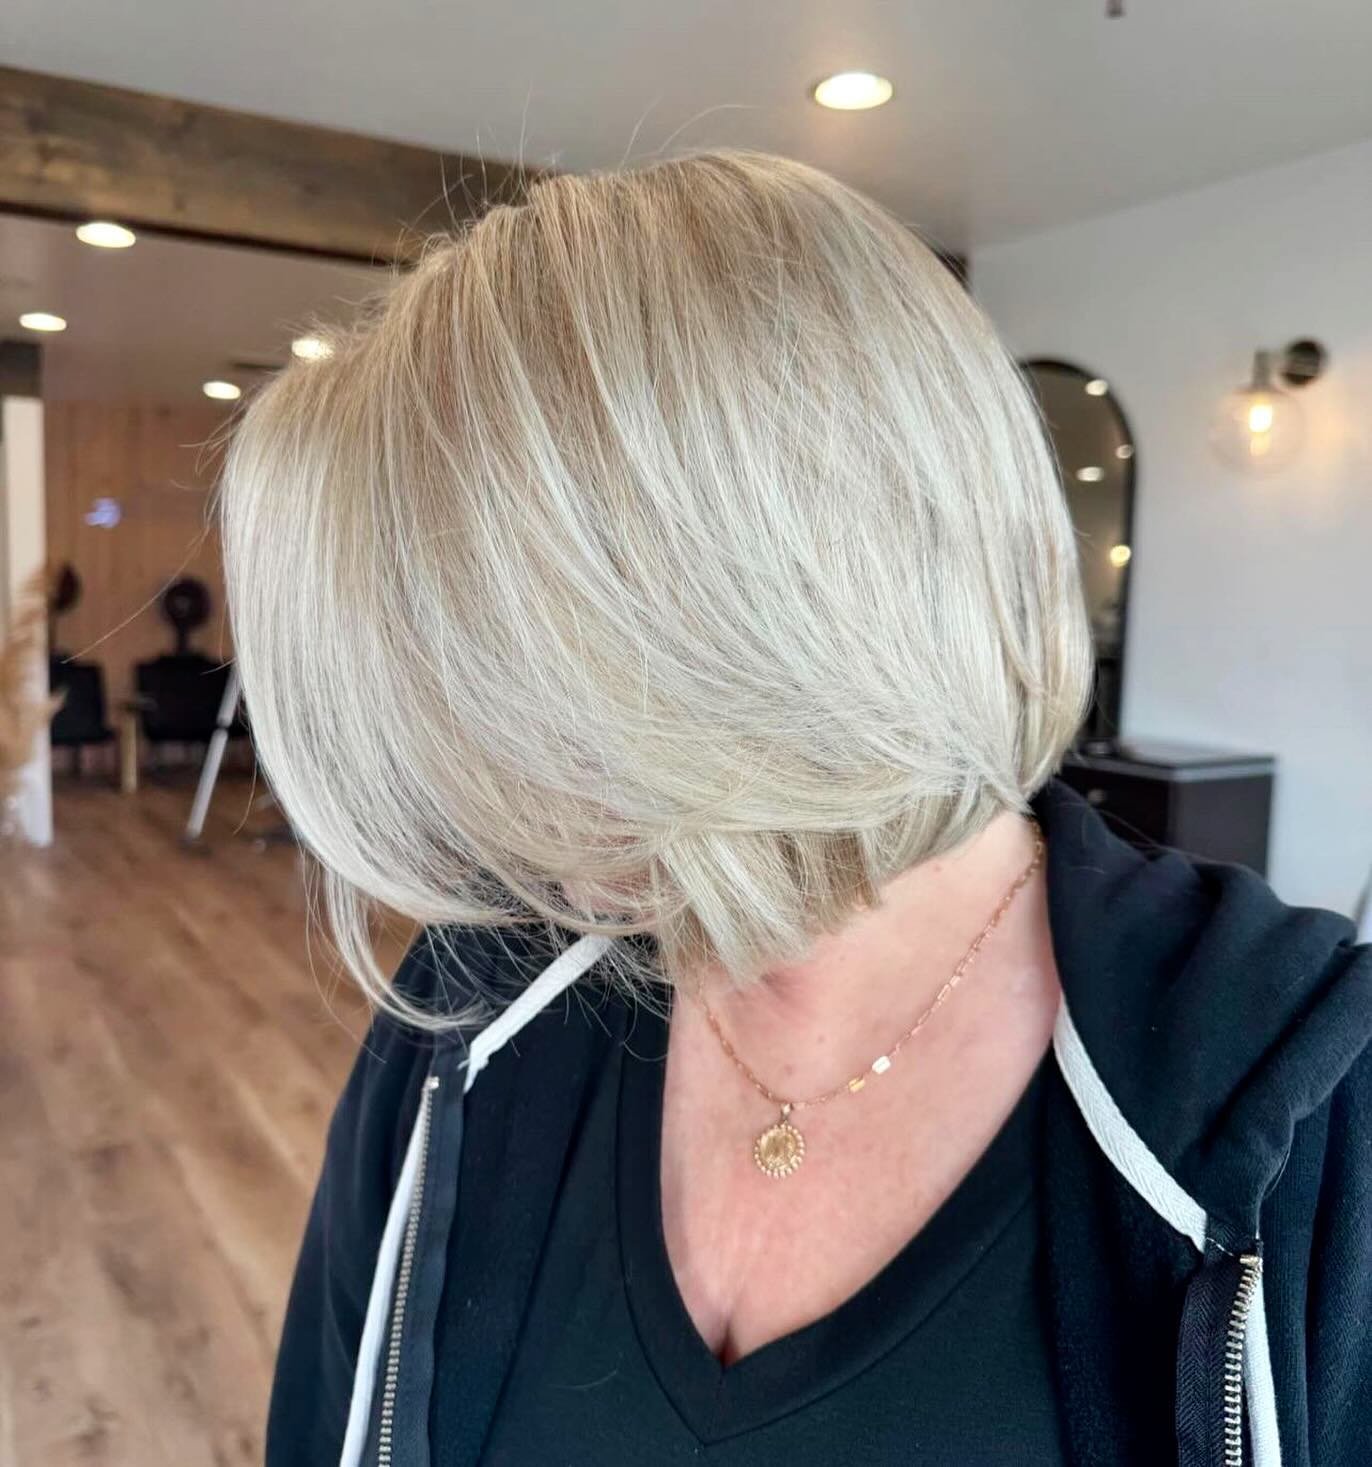 Light and bright this season☀️ 

@laceyxhairdesign with this beautiful look! 

#sumnerspremiersalon #sumnerstylist #sumnerhairstylist #sumnertownusa #sumnerhairsalon